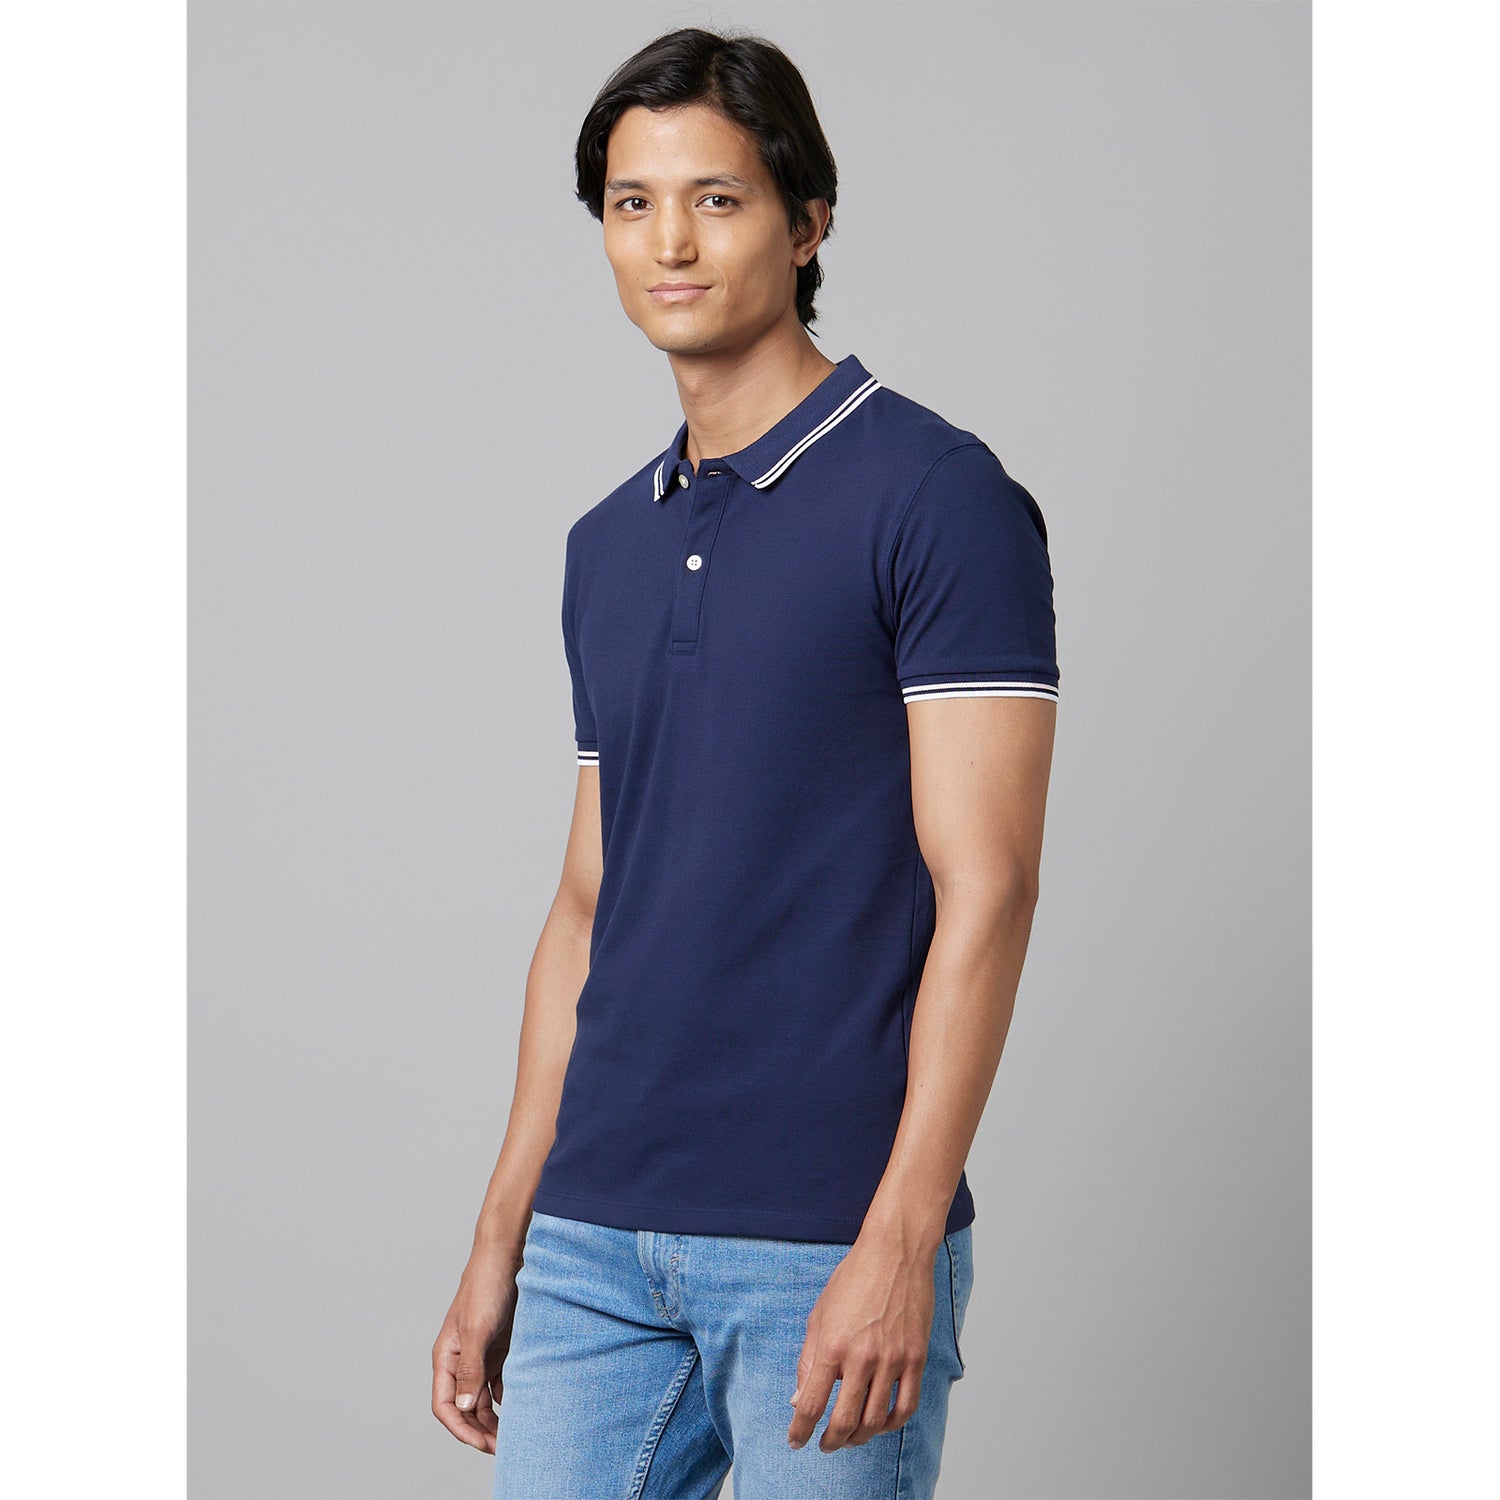 Navy Solid Blue Short Sleeves Polo T-Shirt